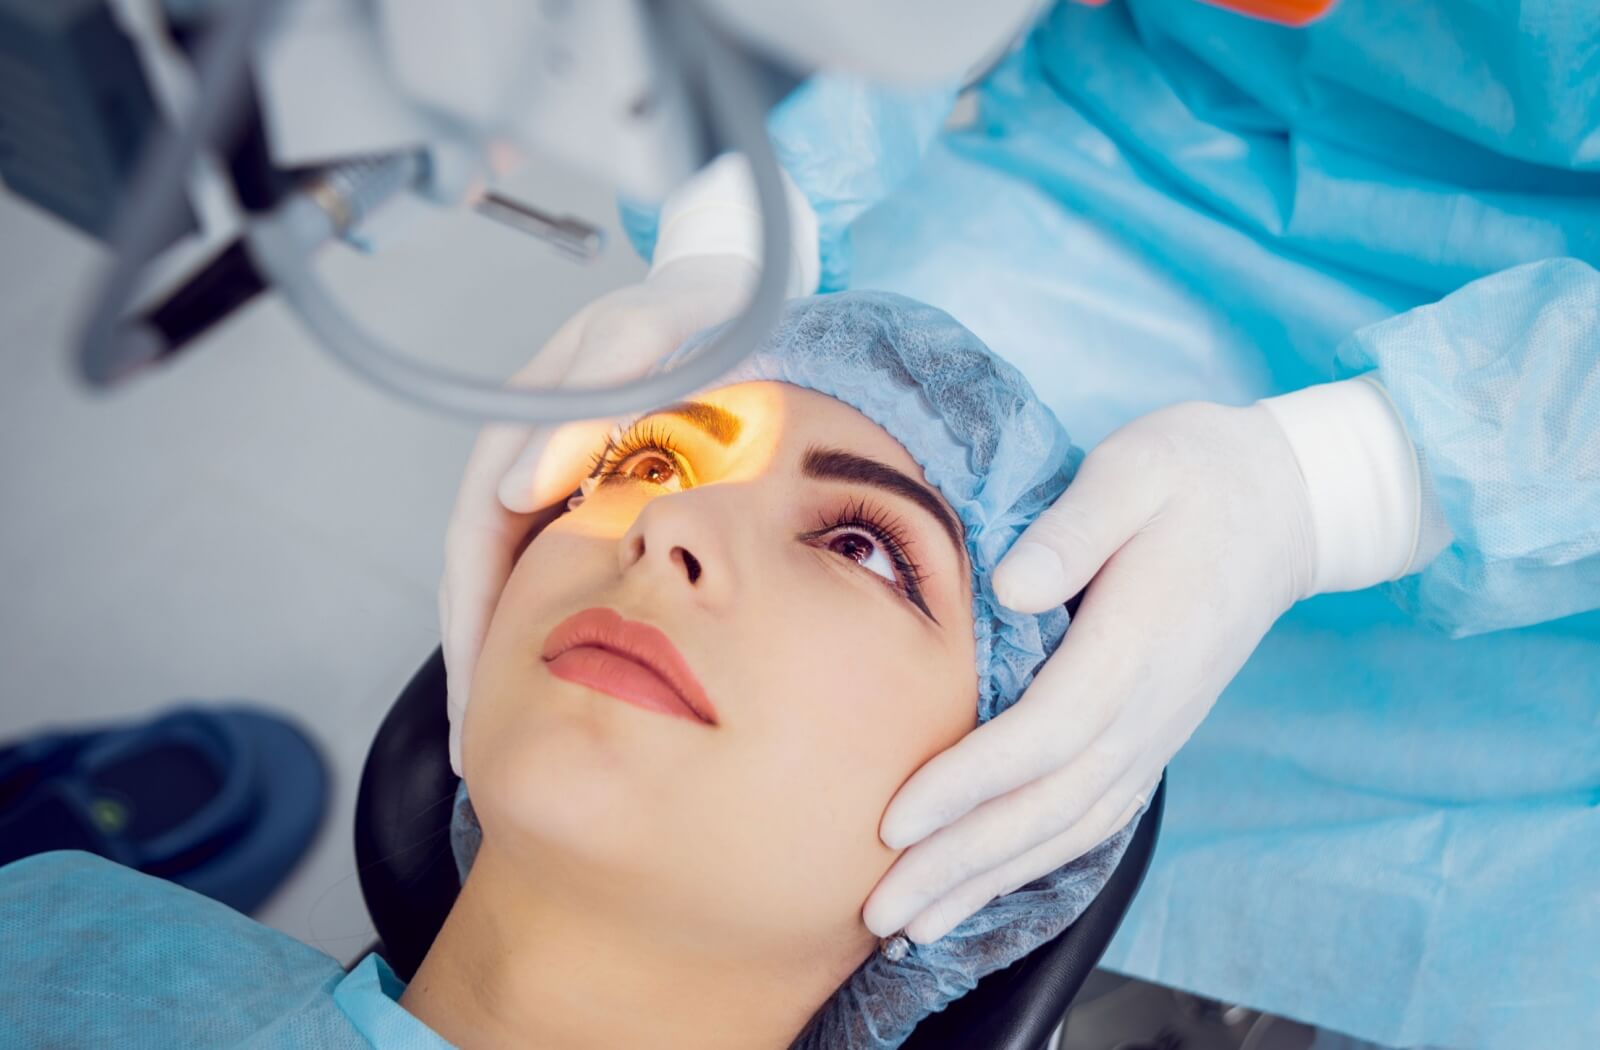 Close up of a young woman's face looking into a light as her eye doctor prepares her for laser eye surgery.